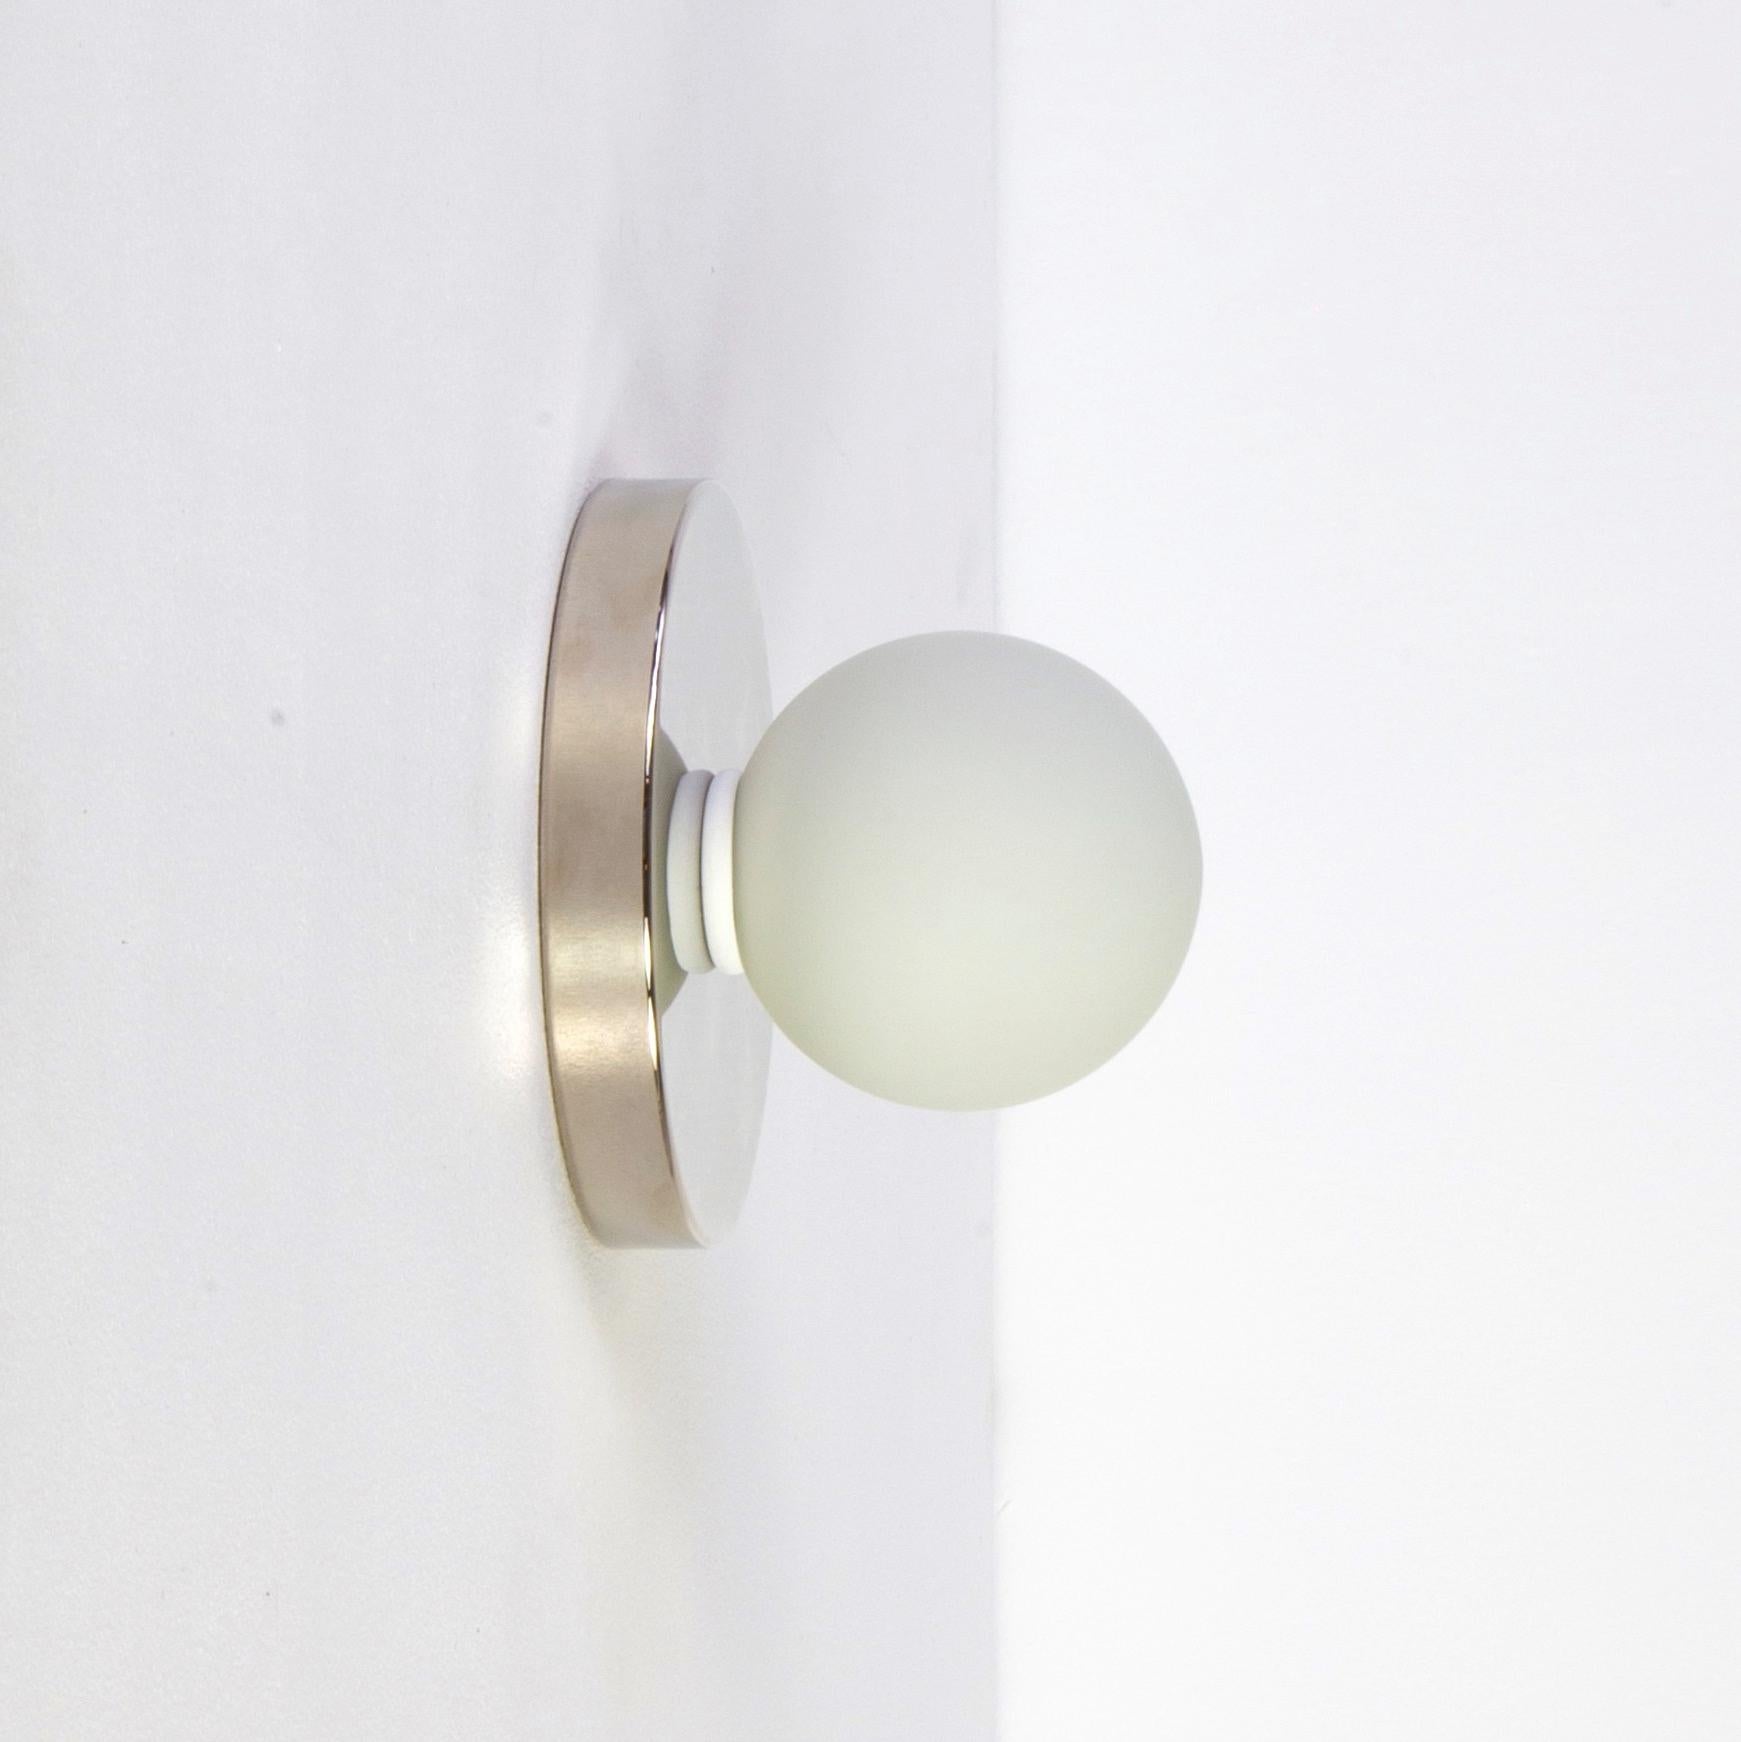 Contemporary Globe Sconce by Research.Lighting, Polished Nickel, In Stock For Sale